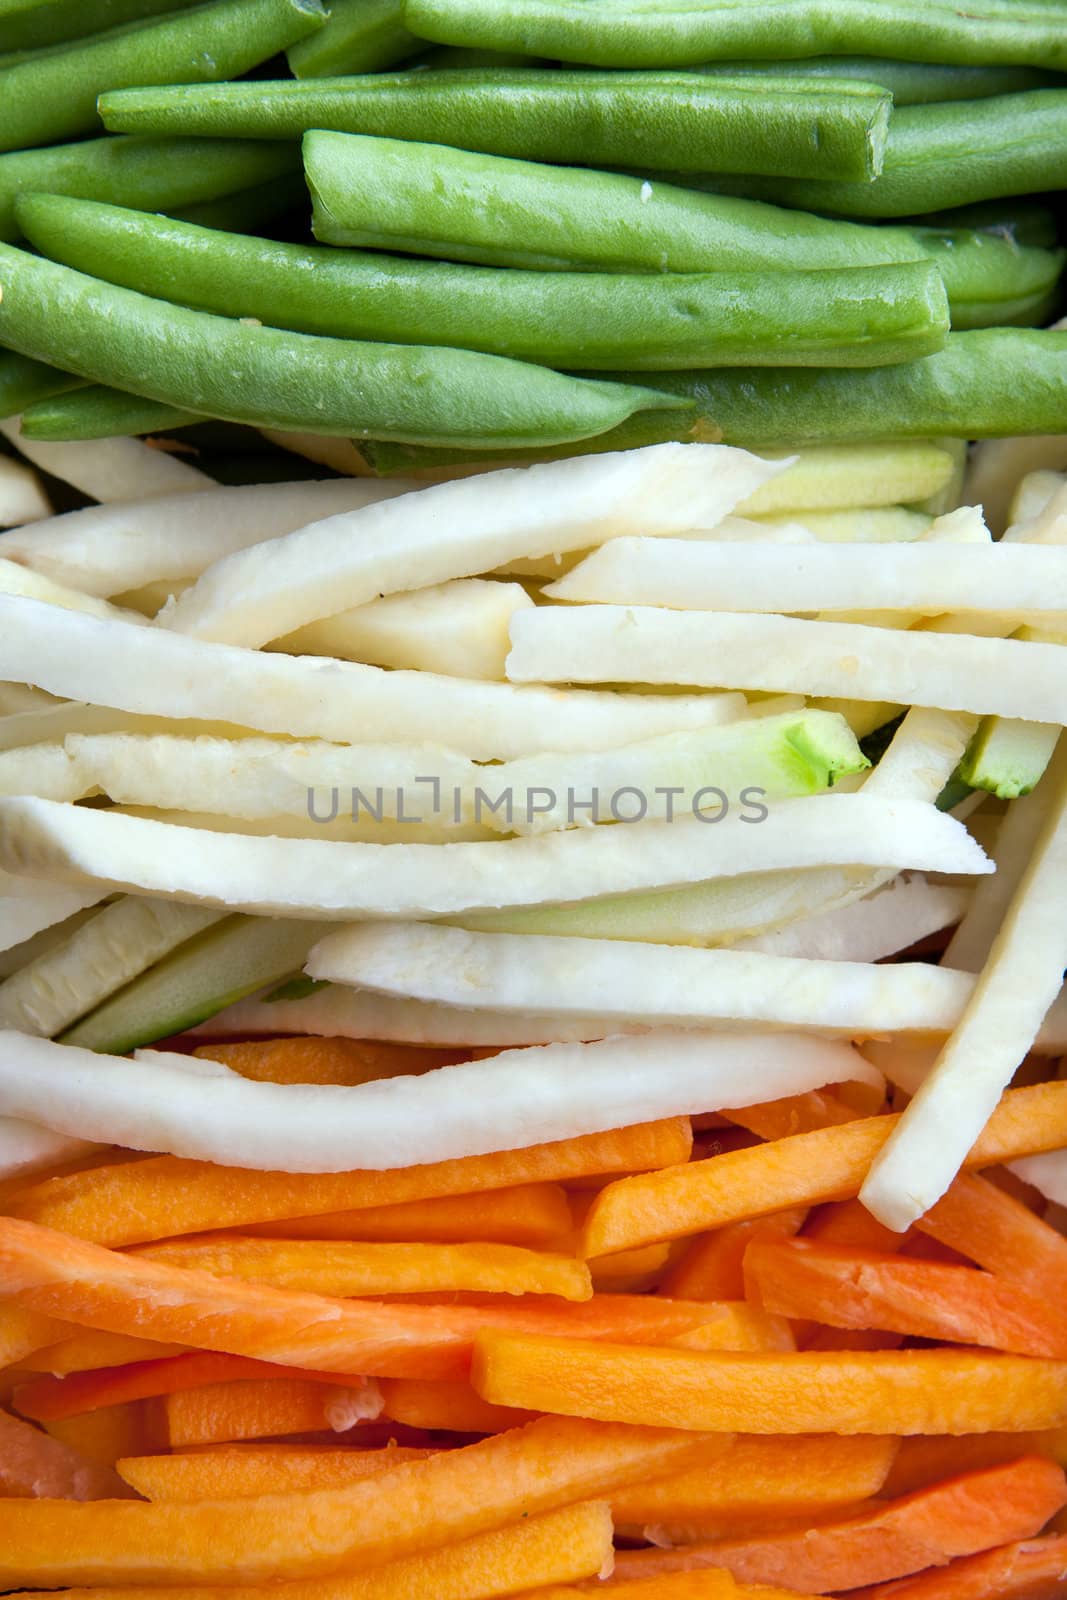 Julienne vegetables by raliand